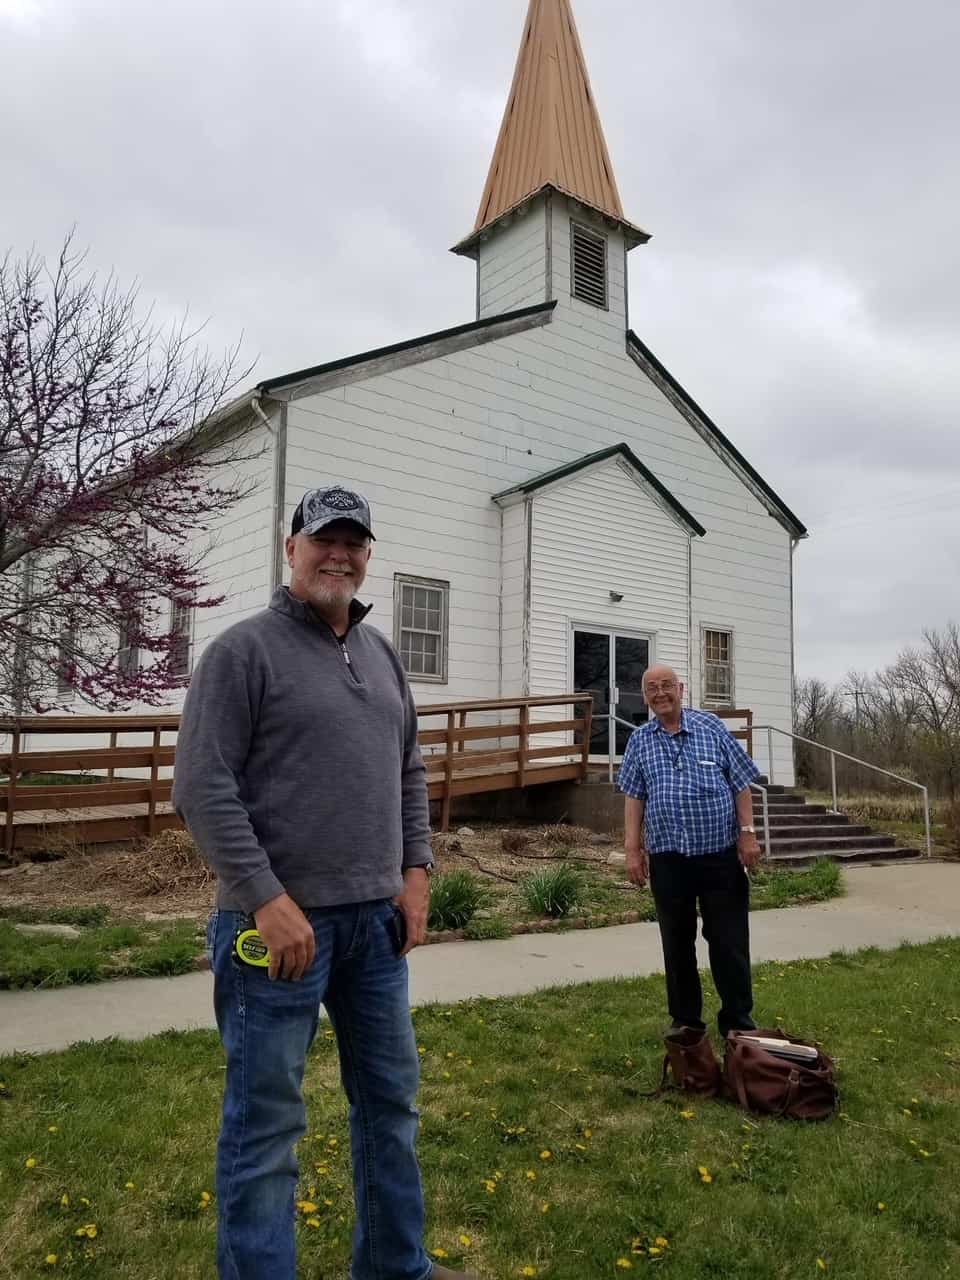 Corey Thomas, vice president of business development for Pishny, is pictured (foreground) at an upcoming project at the historic Latimer Lutheran Church in Latimer, Kan.